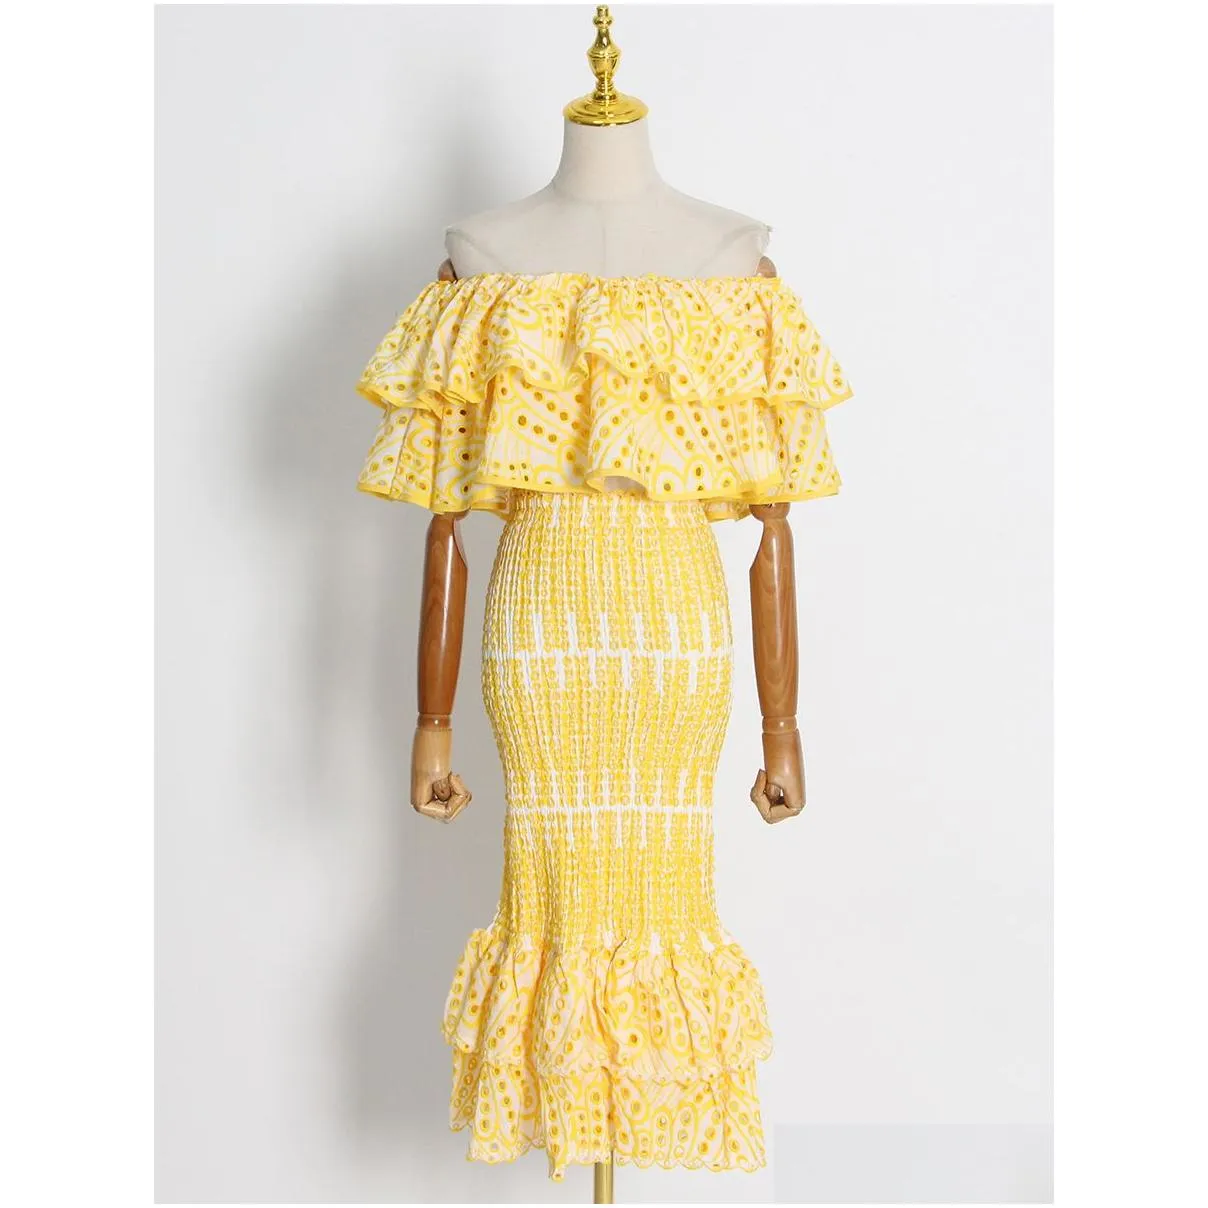 australian two piece dress trendy ruffled heavy embroidered one shoulder short top with a slim high waisted fishtail skirt set